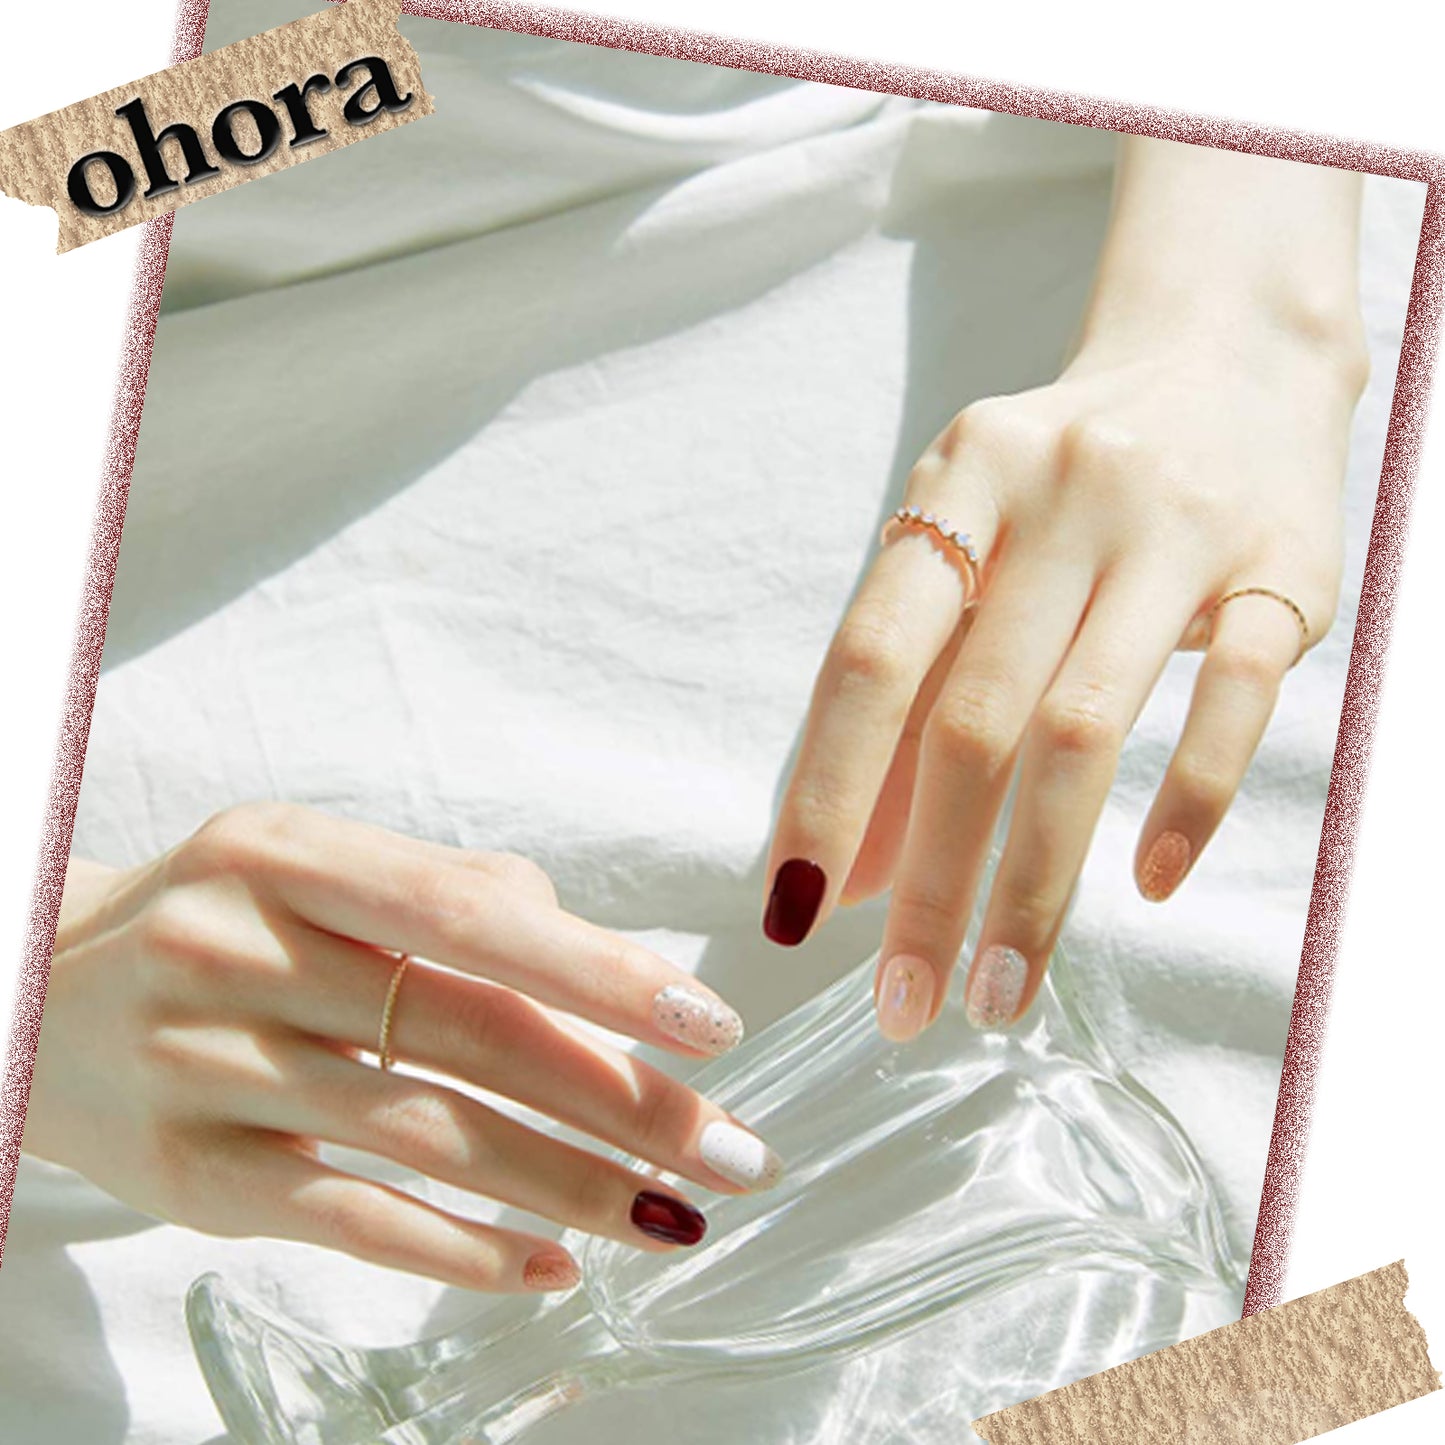 Ohora (N Collect Nails)